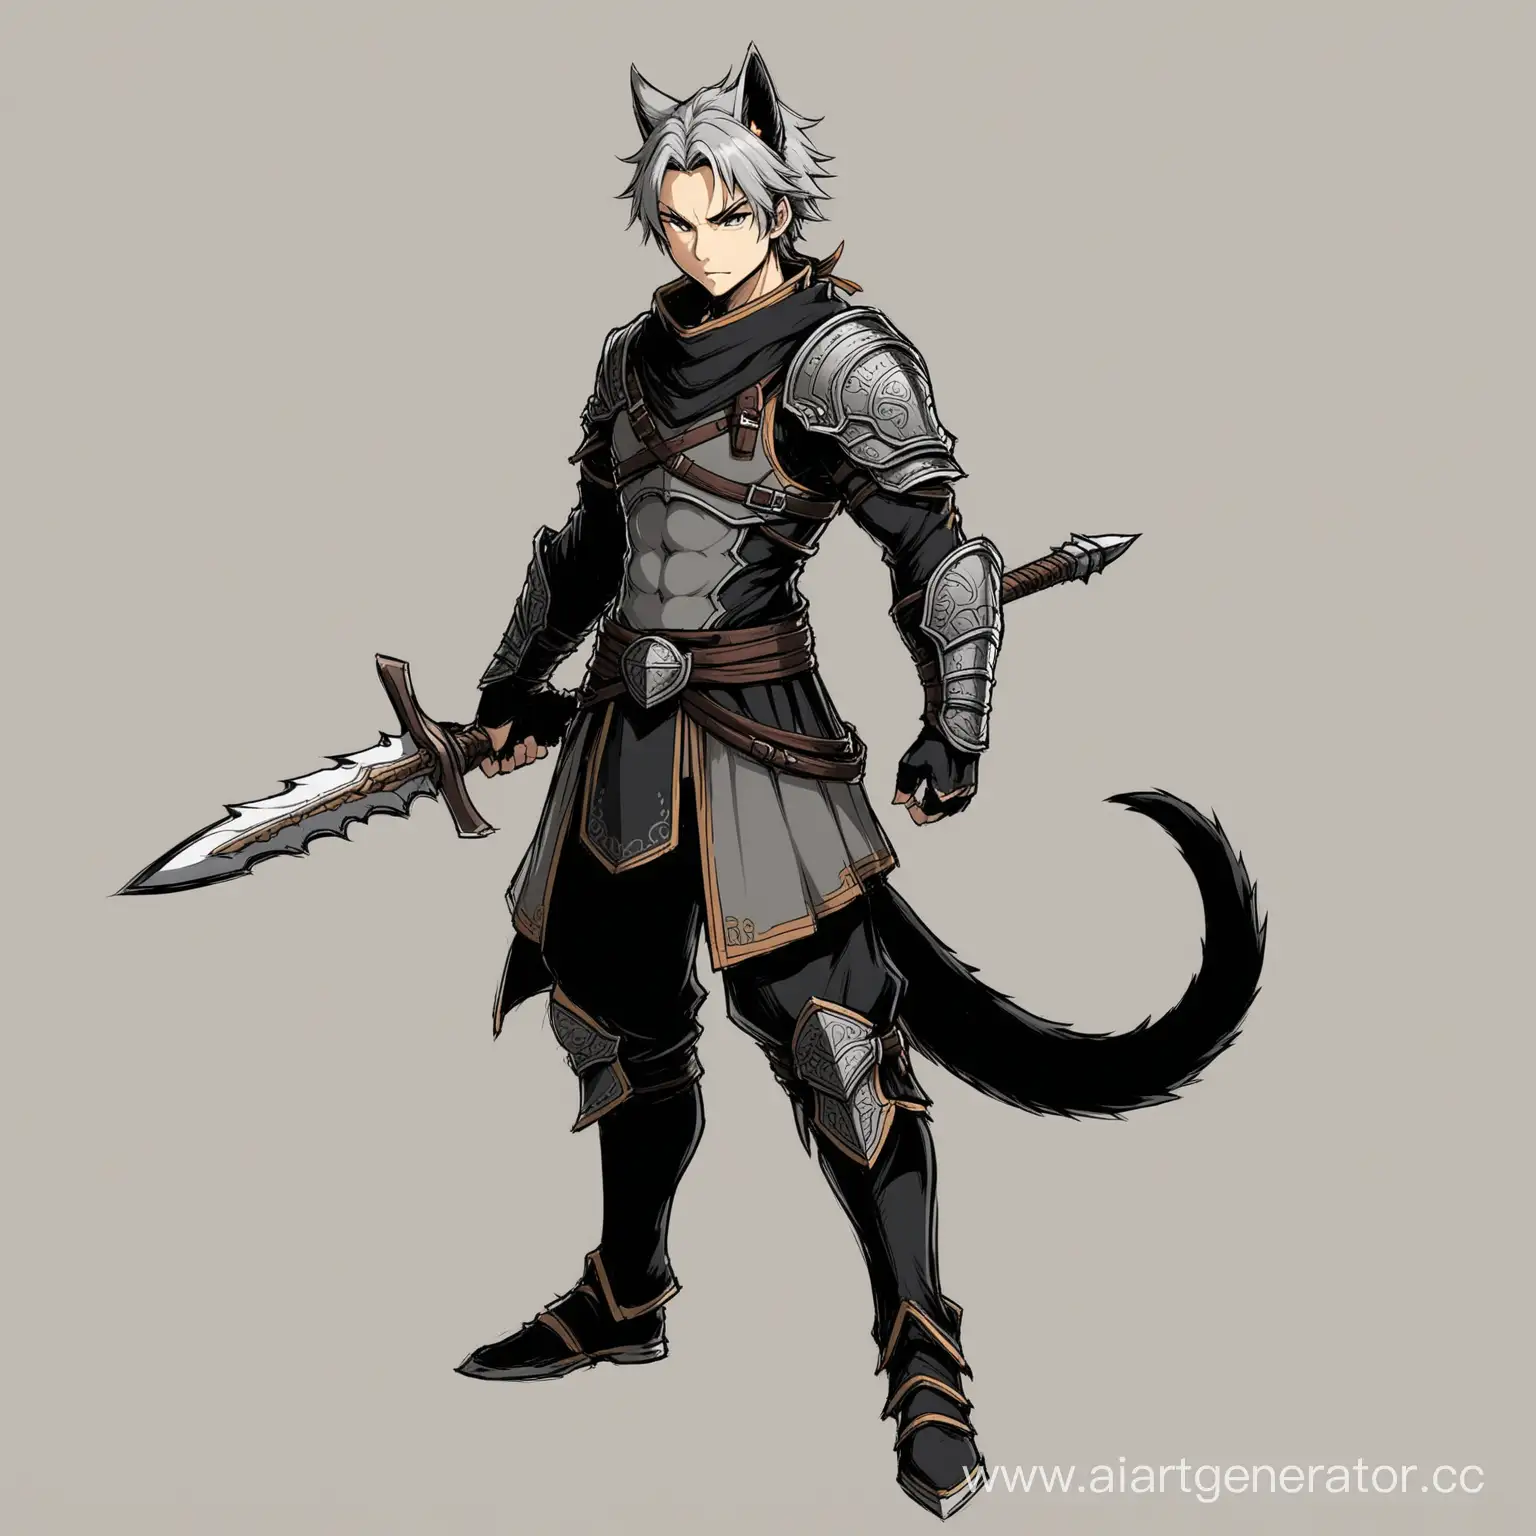 Anime-Style-GreyHaired-Warrior-Boy-with-Ears-and-Tail